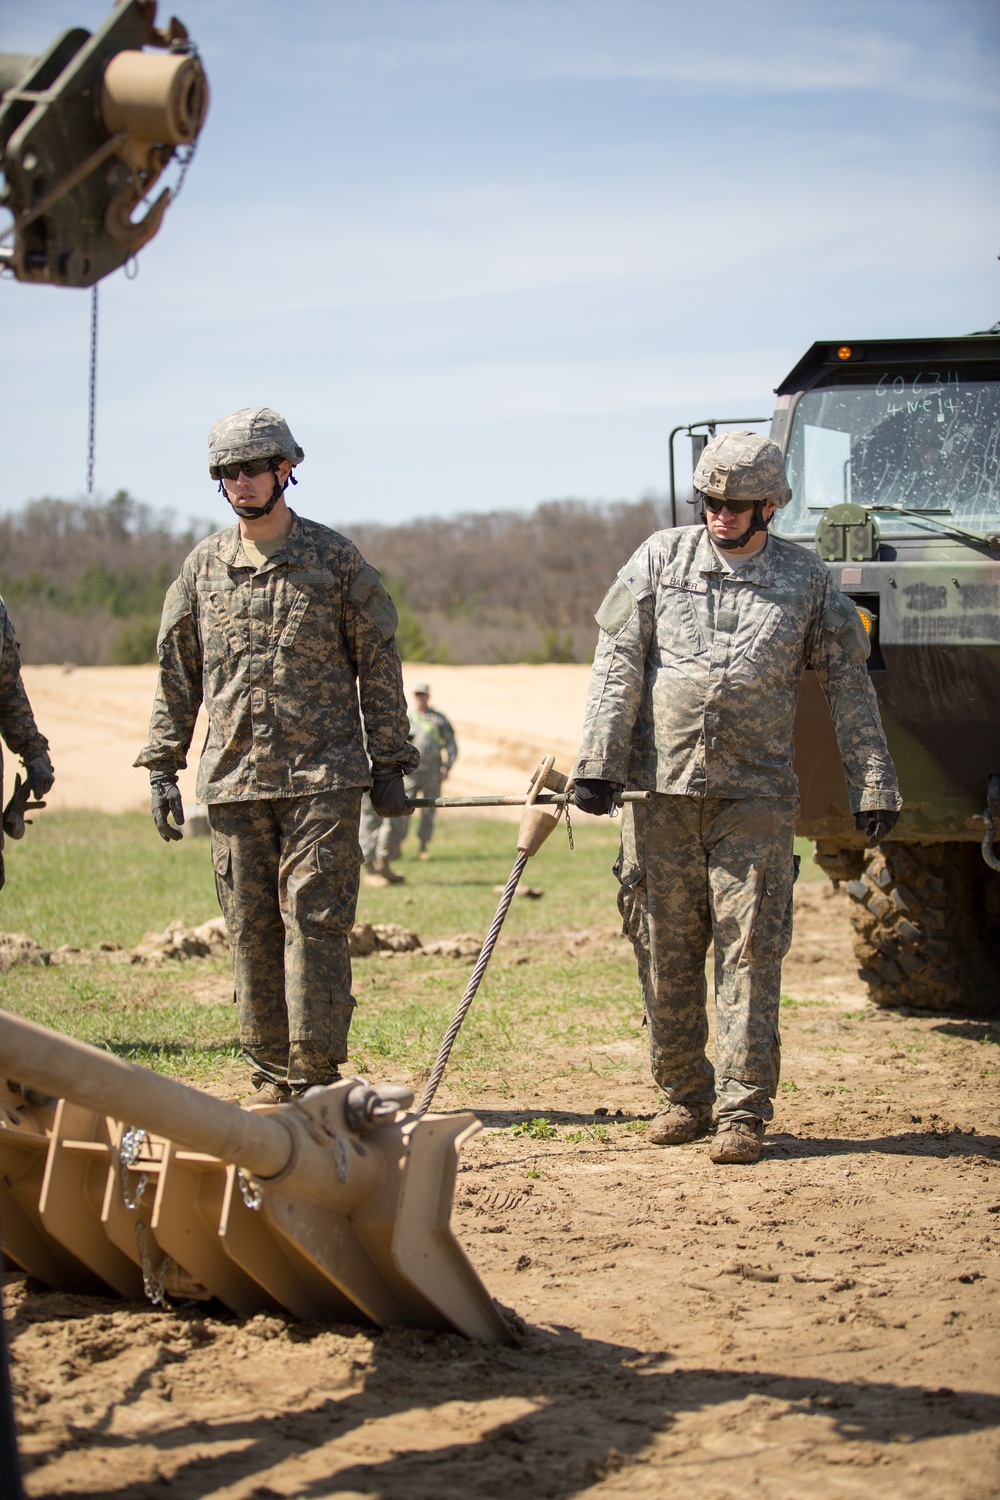 443rd vehicle recovery at Fort Mccoy